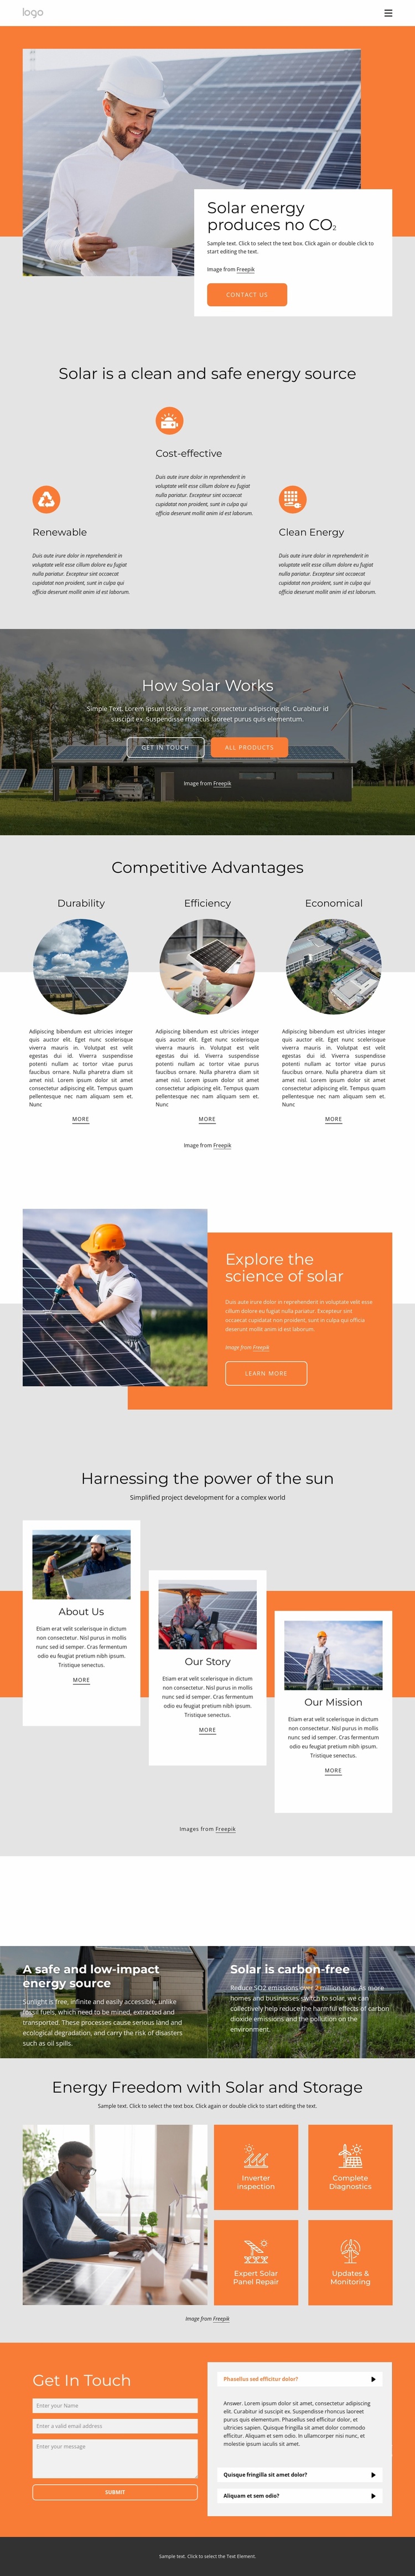 Power your home with clean solar energy Website Template